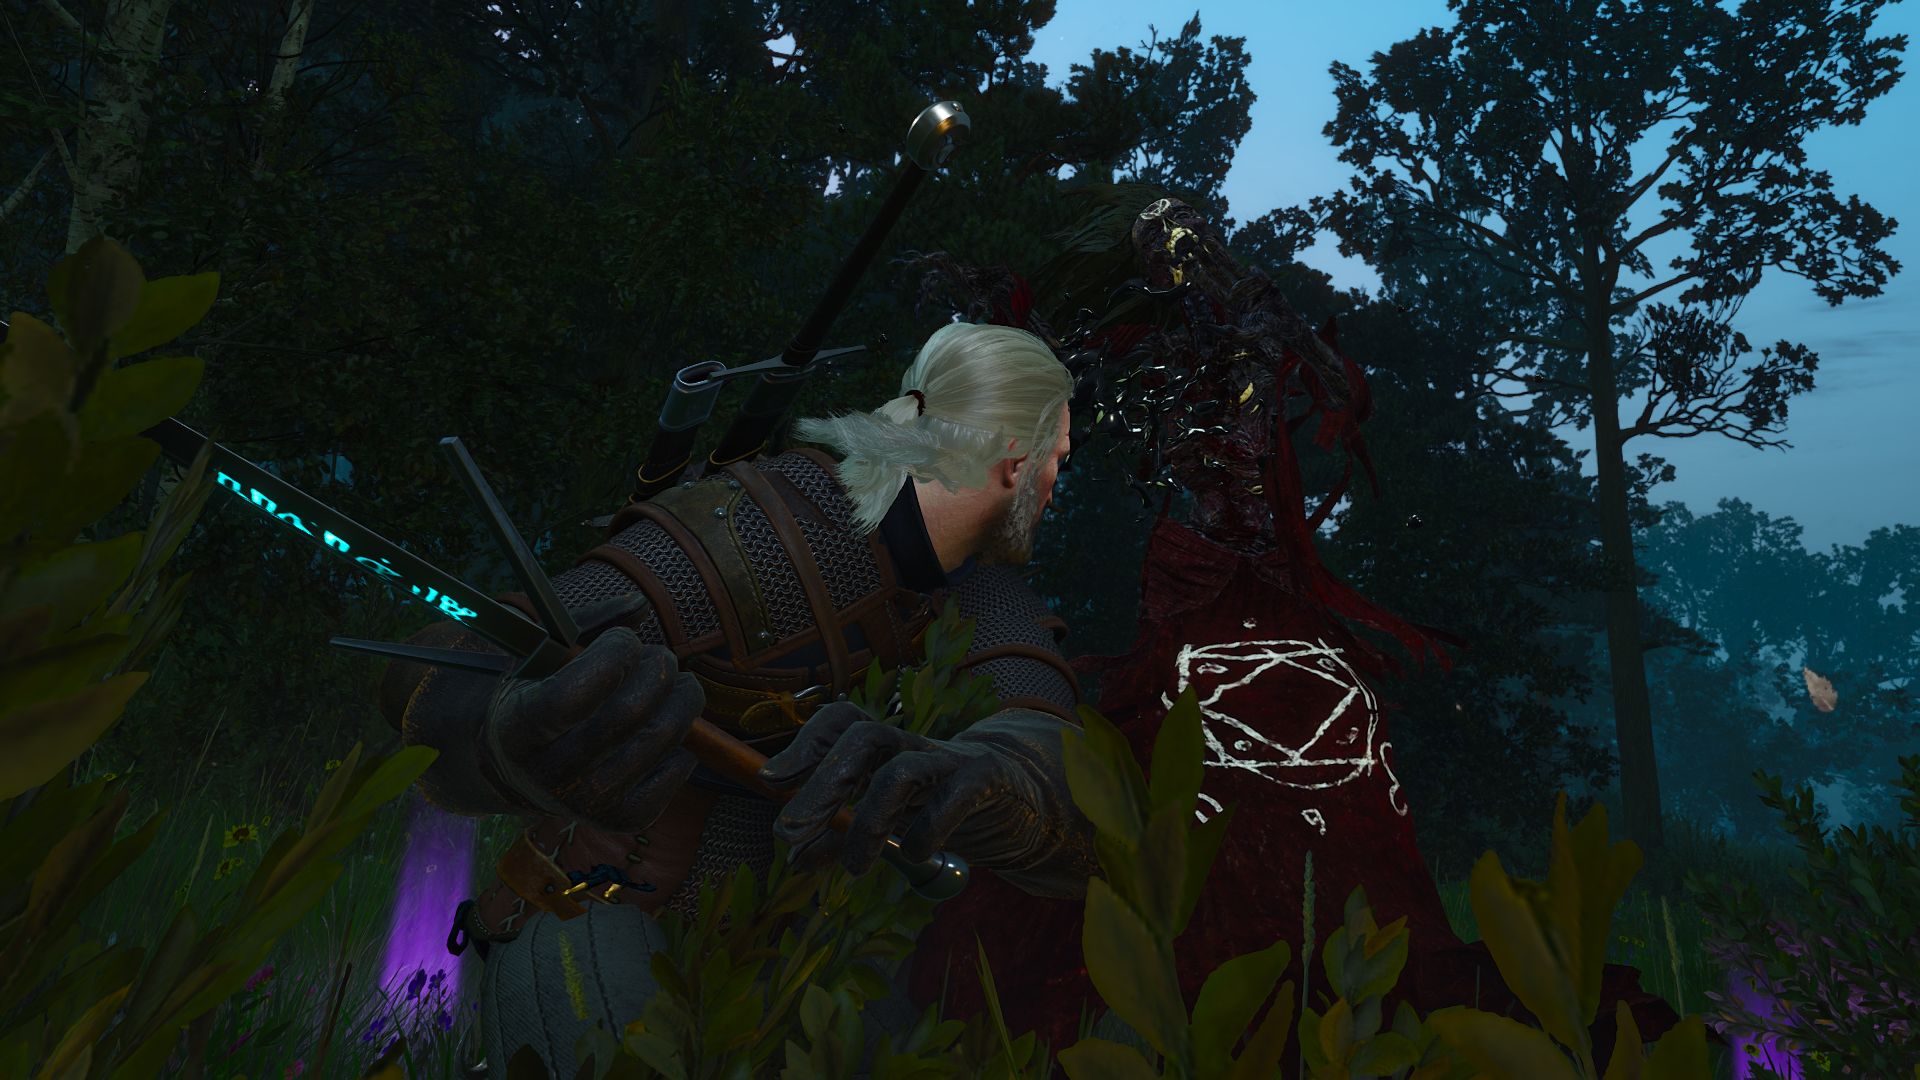 Geralt swings at a nightwraith at night in The Witcher 3.